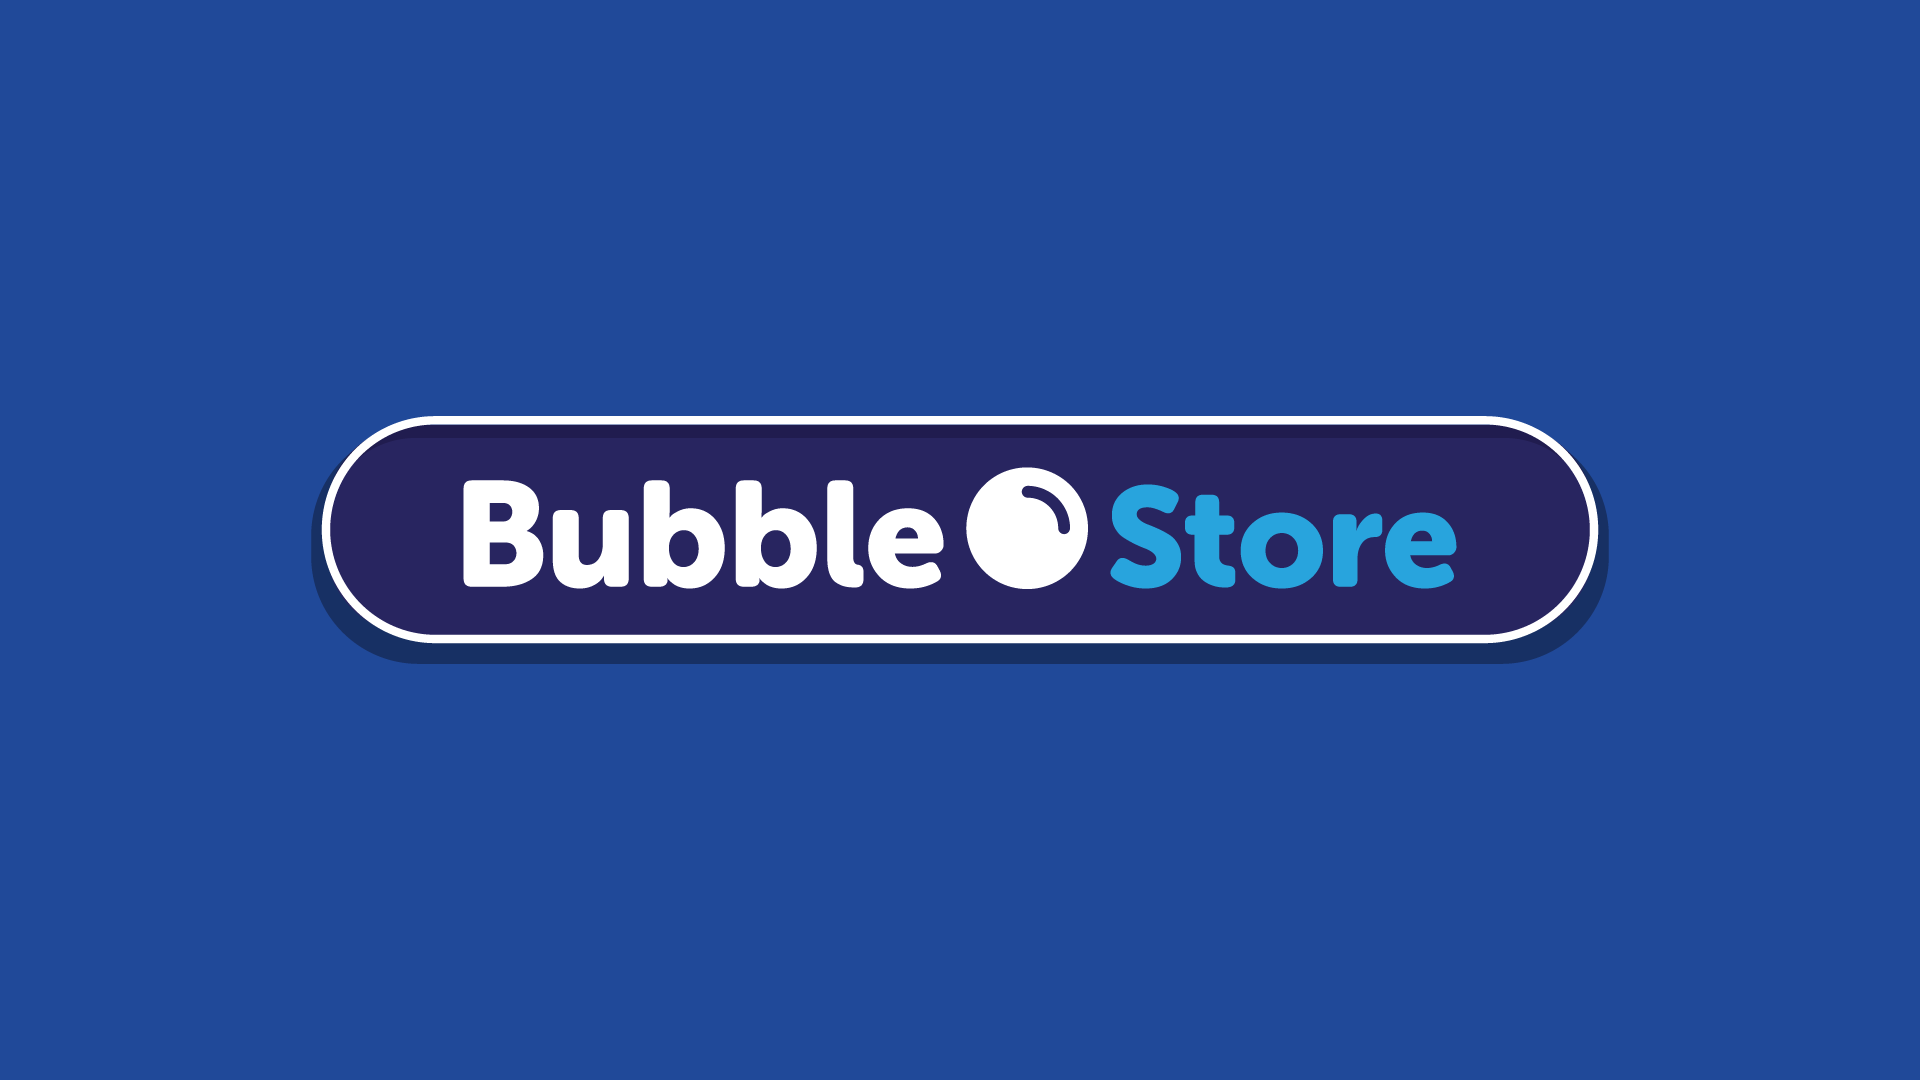 The Bubble Store: Motivational learning for students